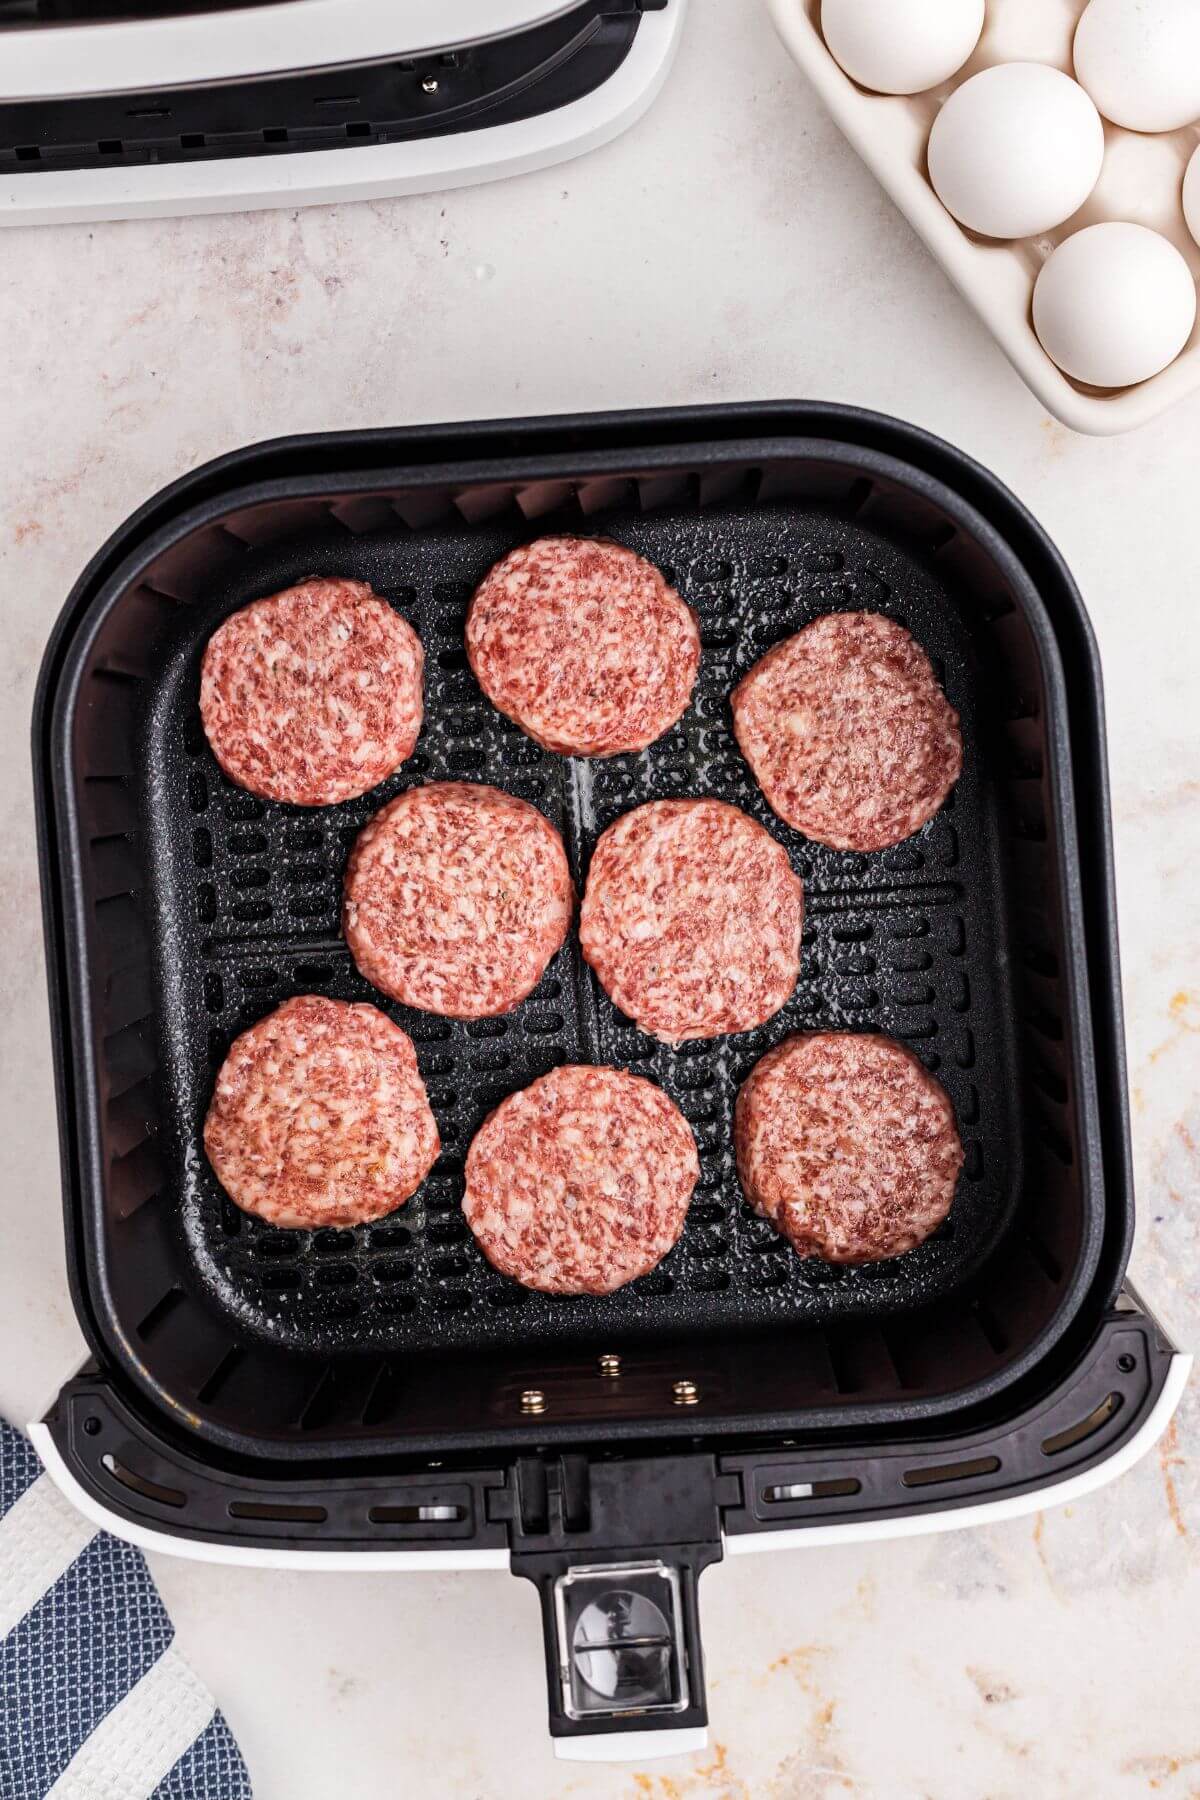 Uncooked sausage patties in the air fryer basket before being cooked. 